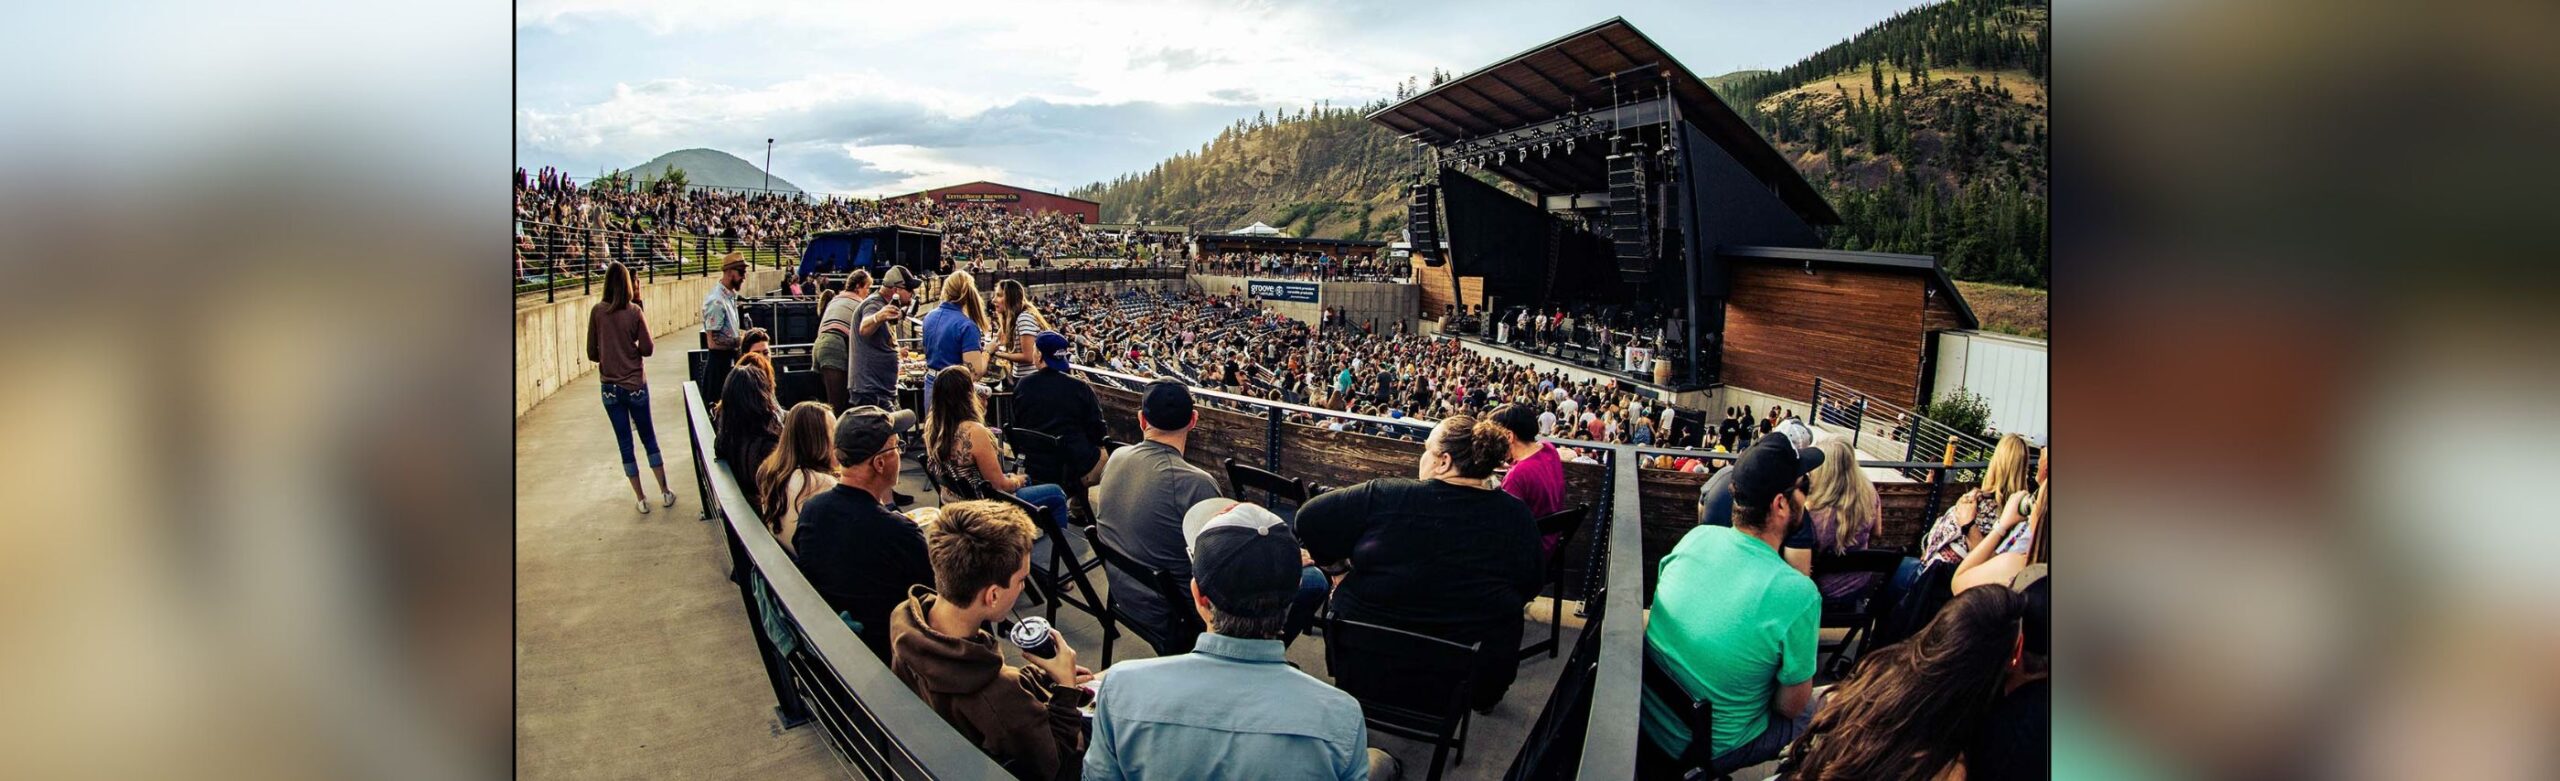 Now Available: Premium Box Seats for RAIN at KettleHouse Amphitheater Image